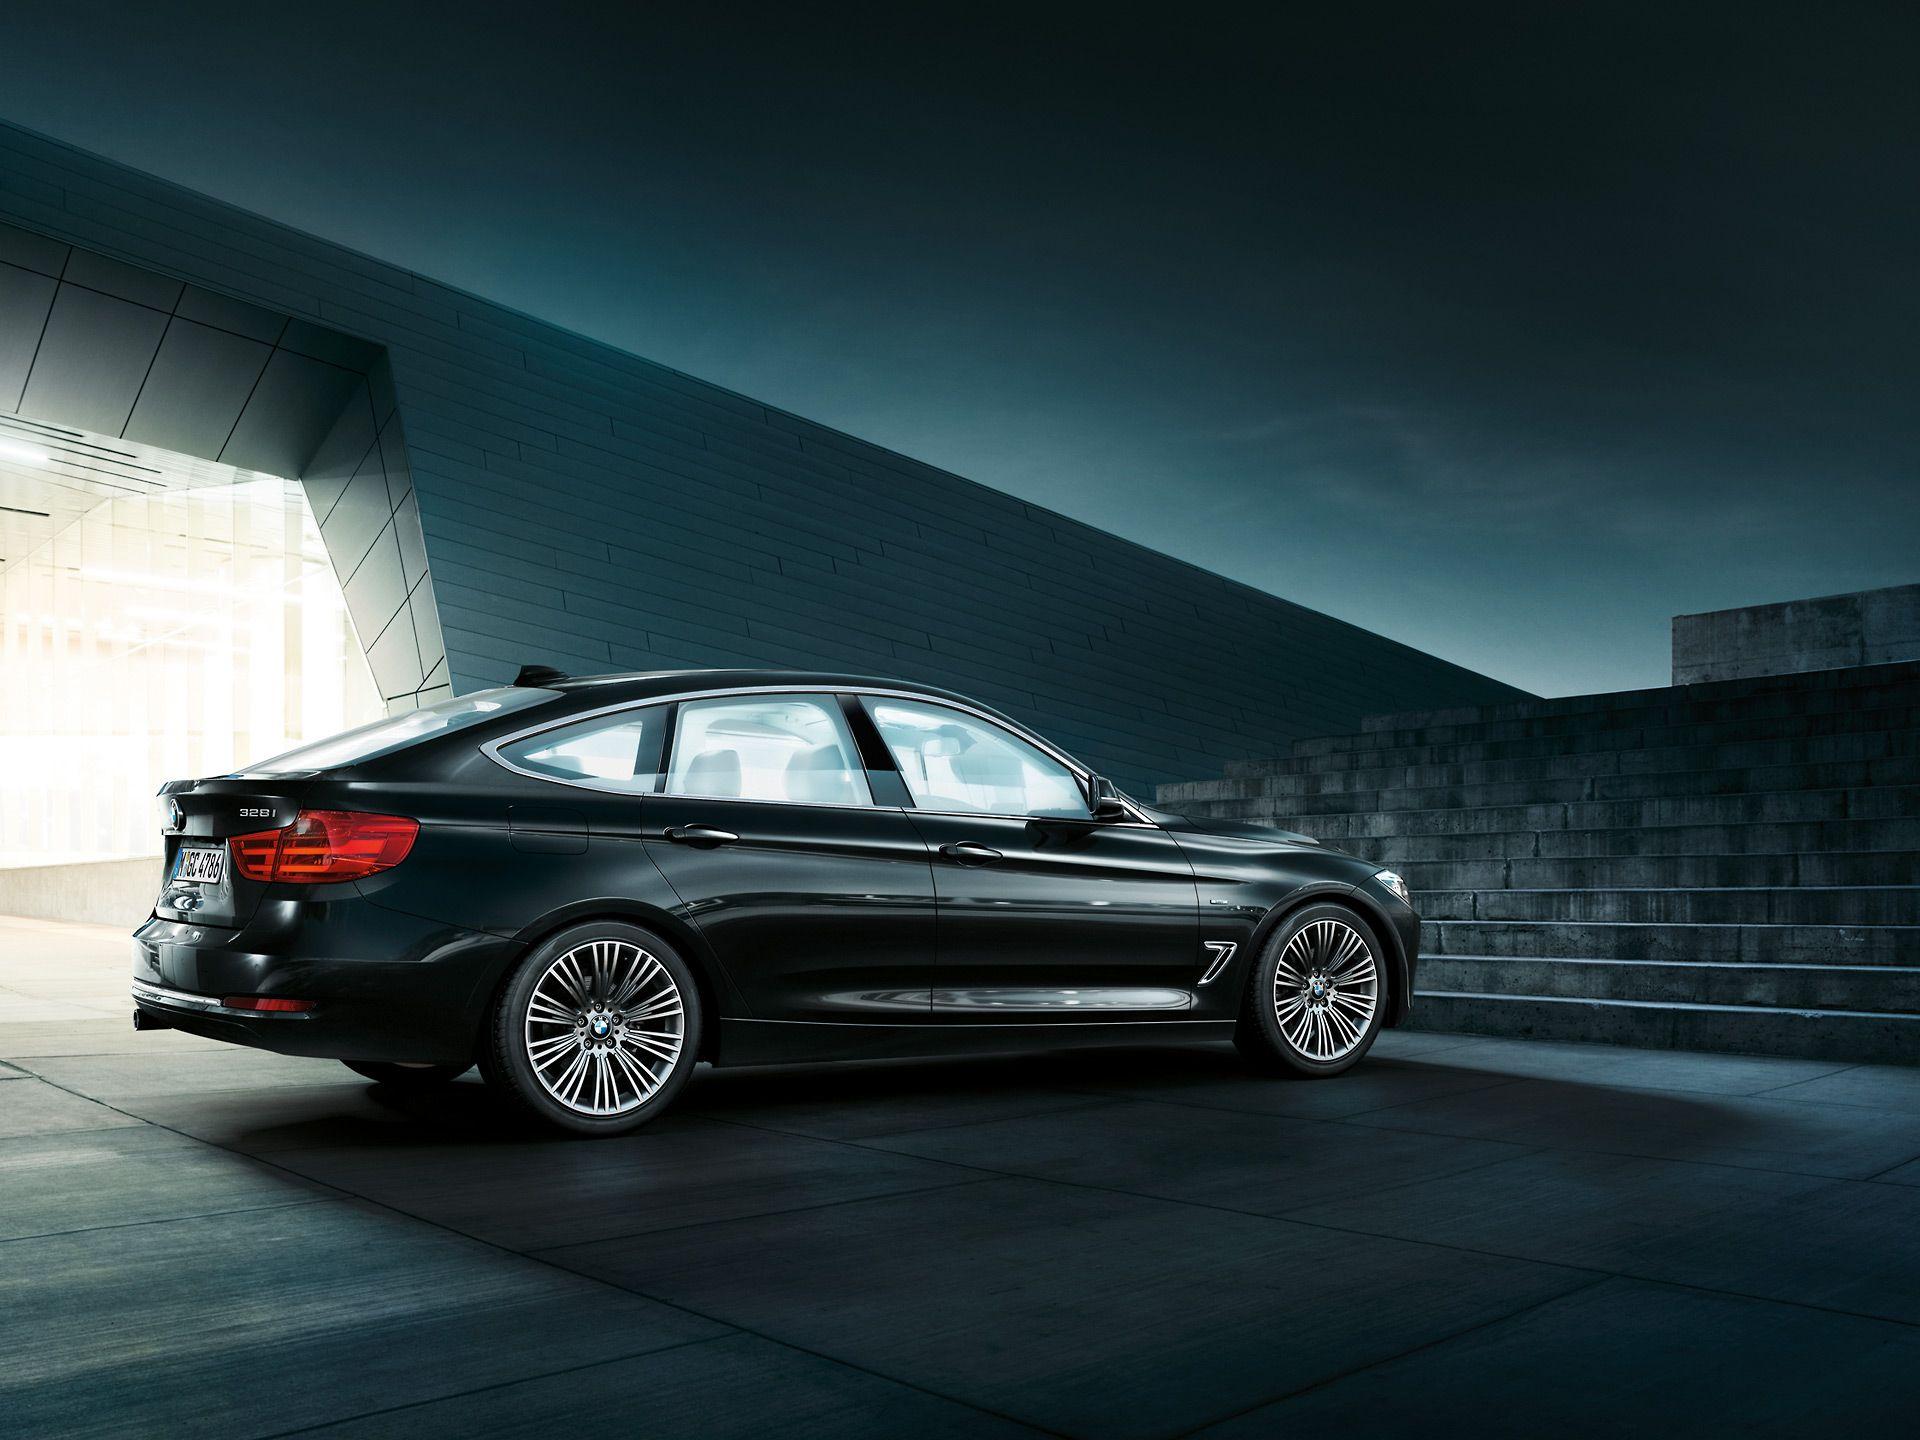 BMW 3 Series Touring, Image and videos